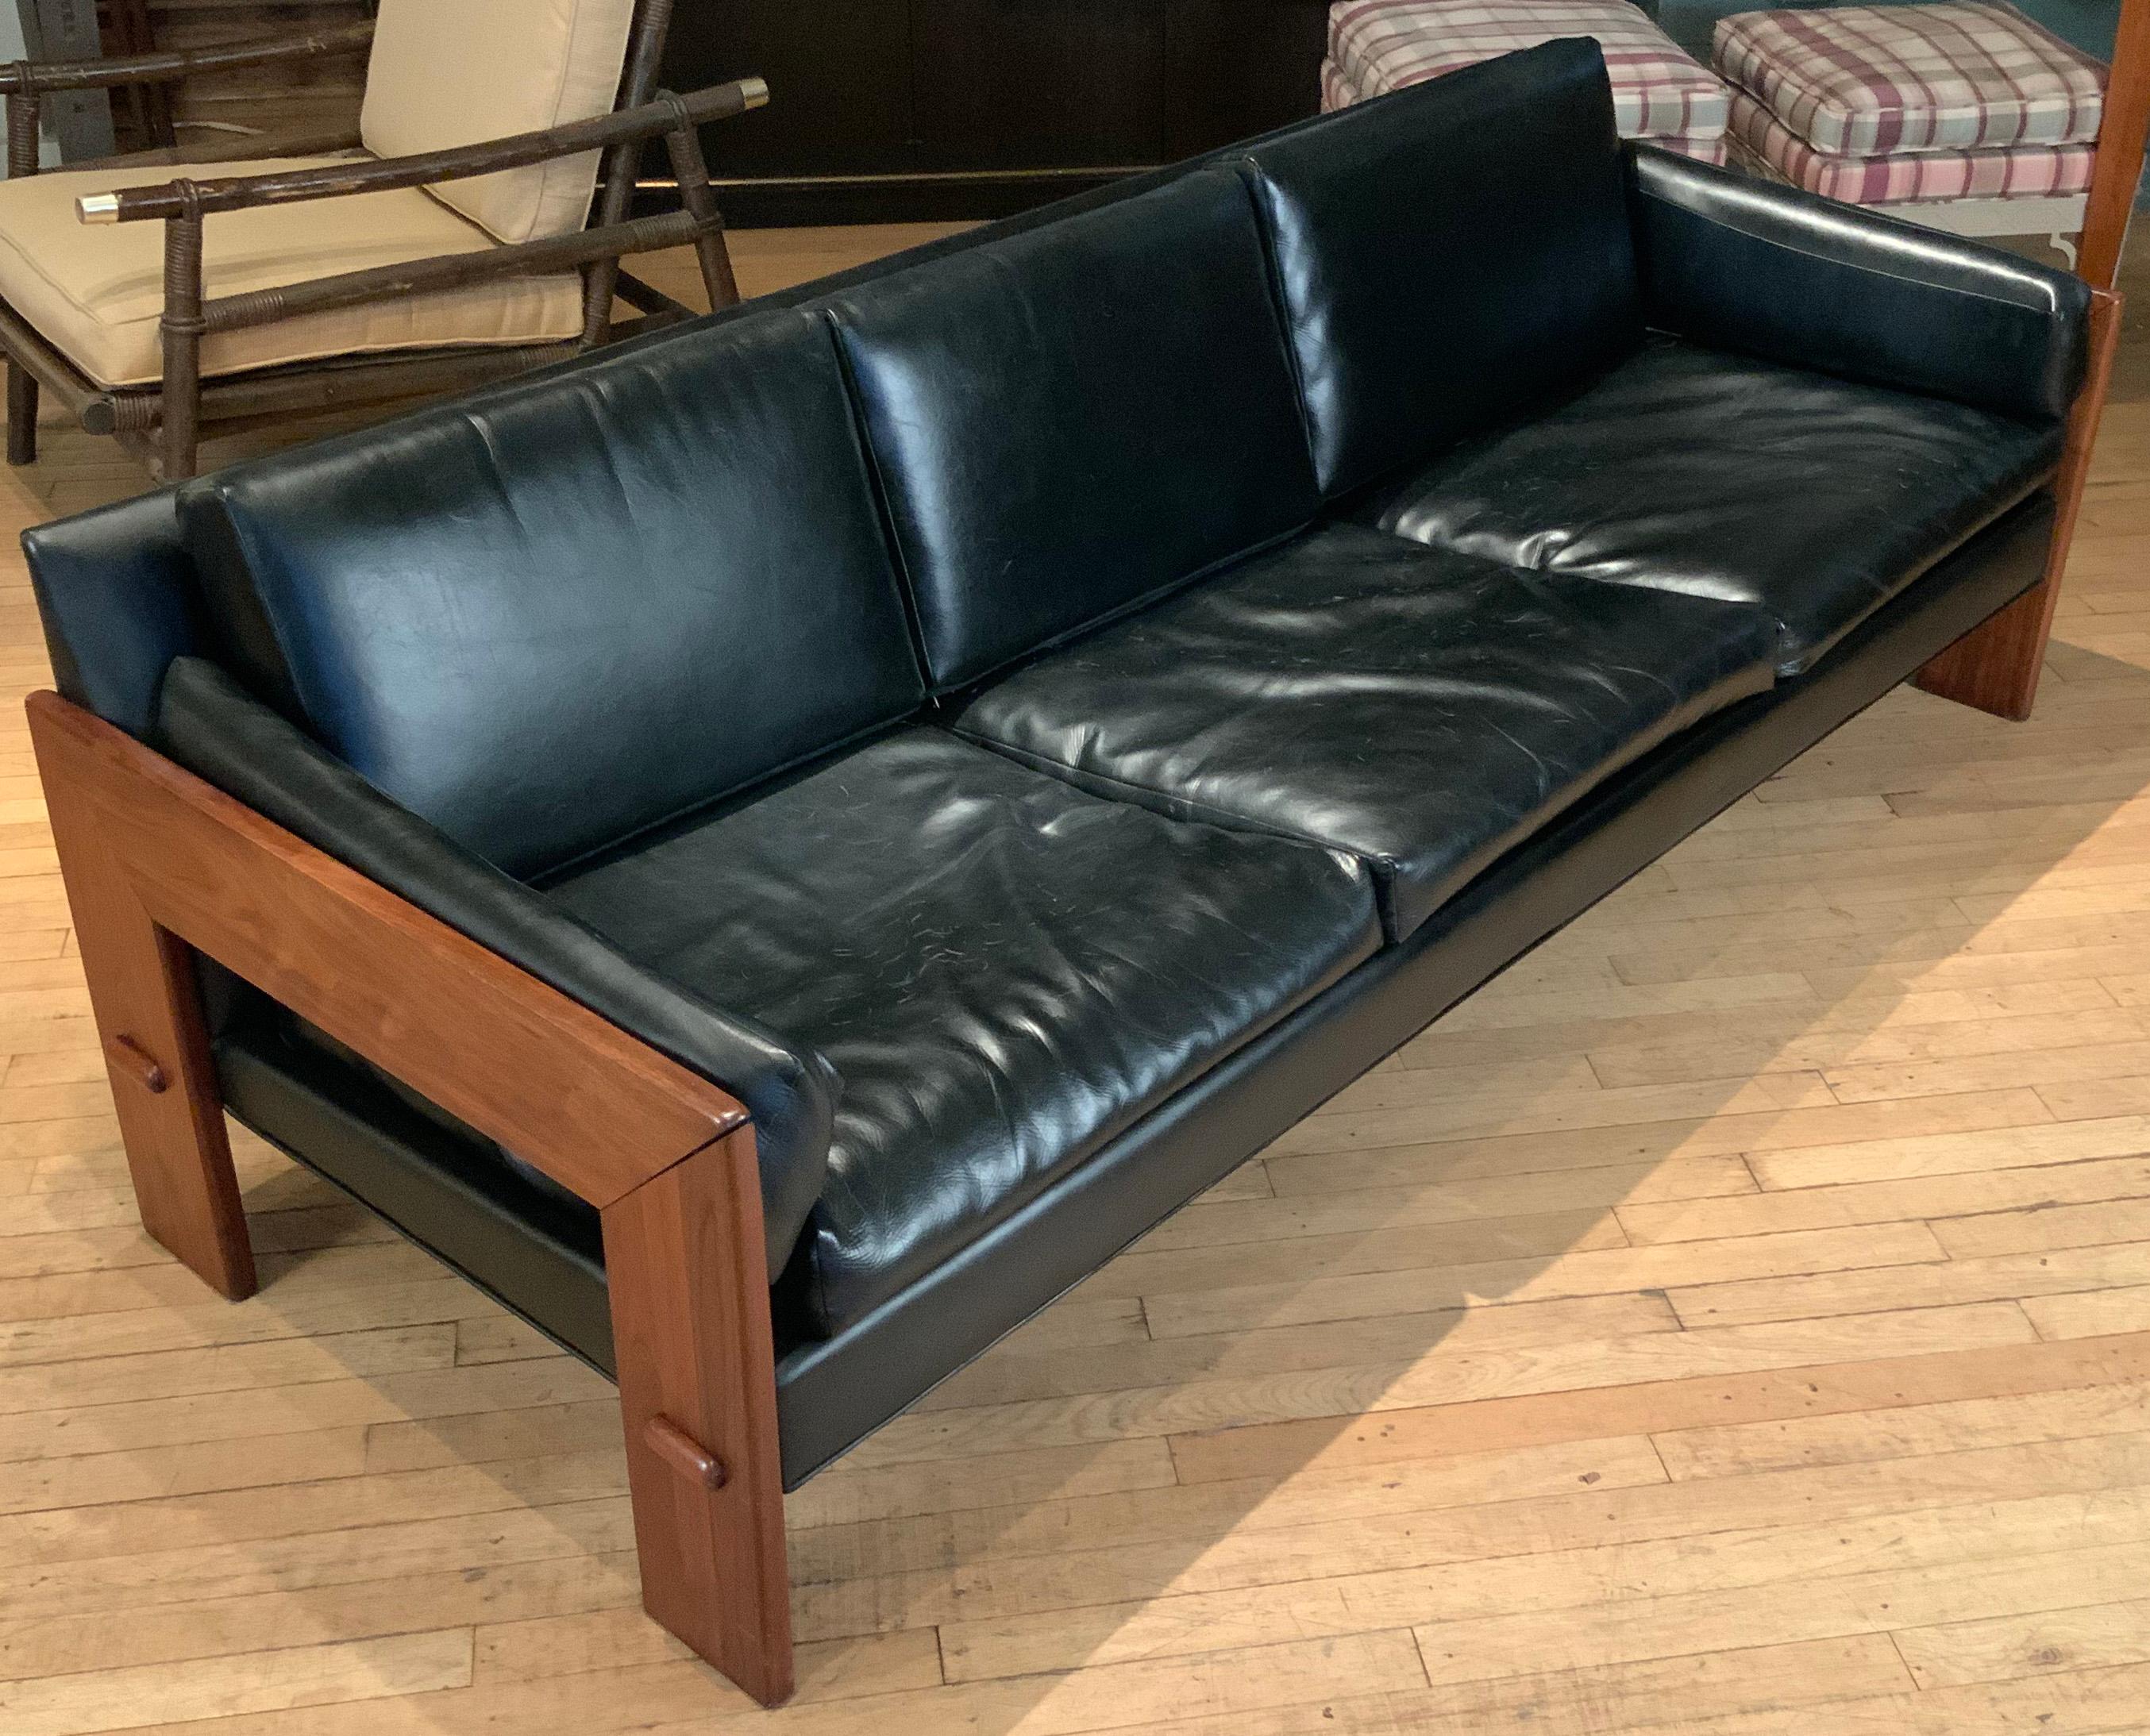 A Classic modern 1960s three-seat sofa with a solid walnut frame, with inverted U shaped ends, and its original black vinyl upholstery.